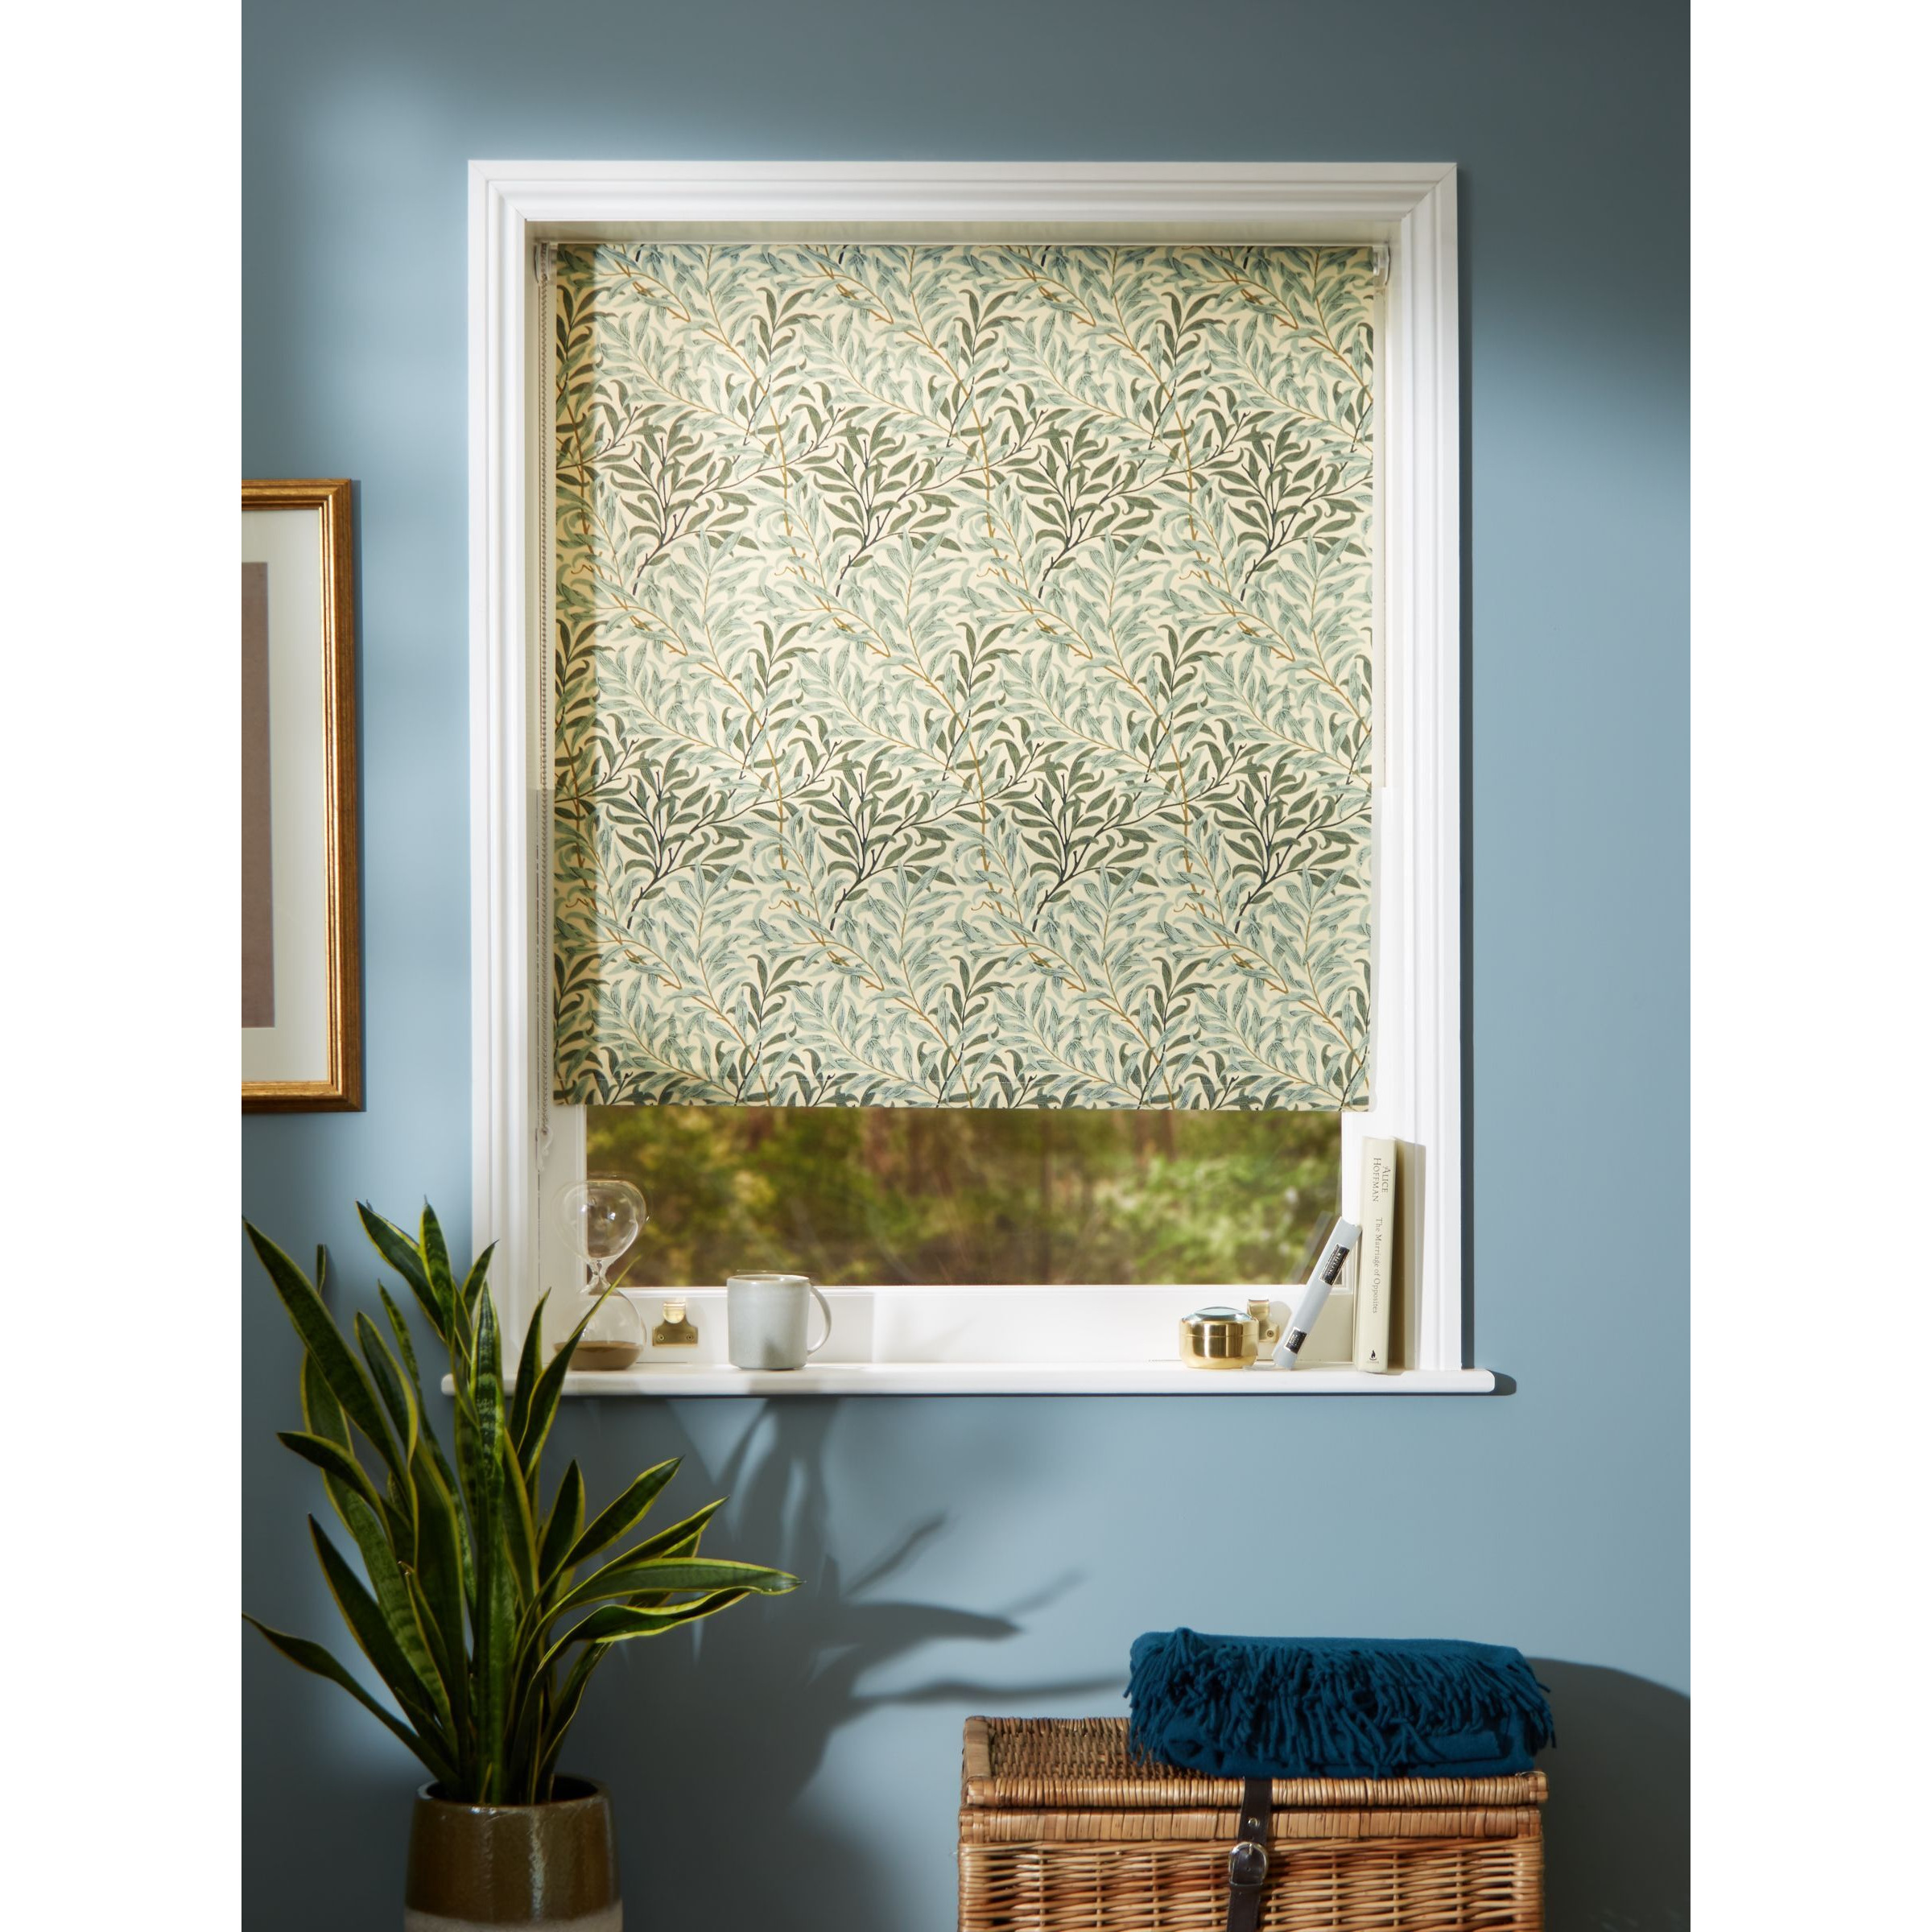 Morris & Co. Willow Bough Daylight Roller Blind - image 1